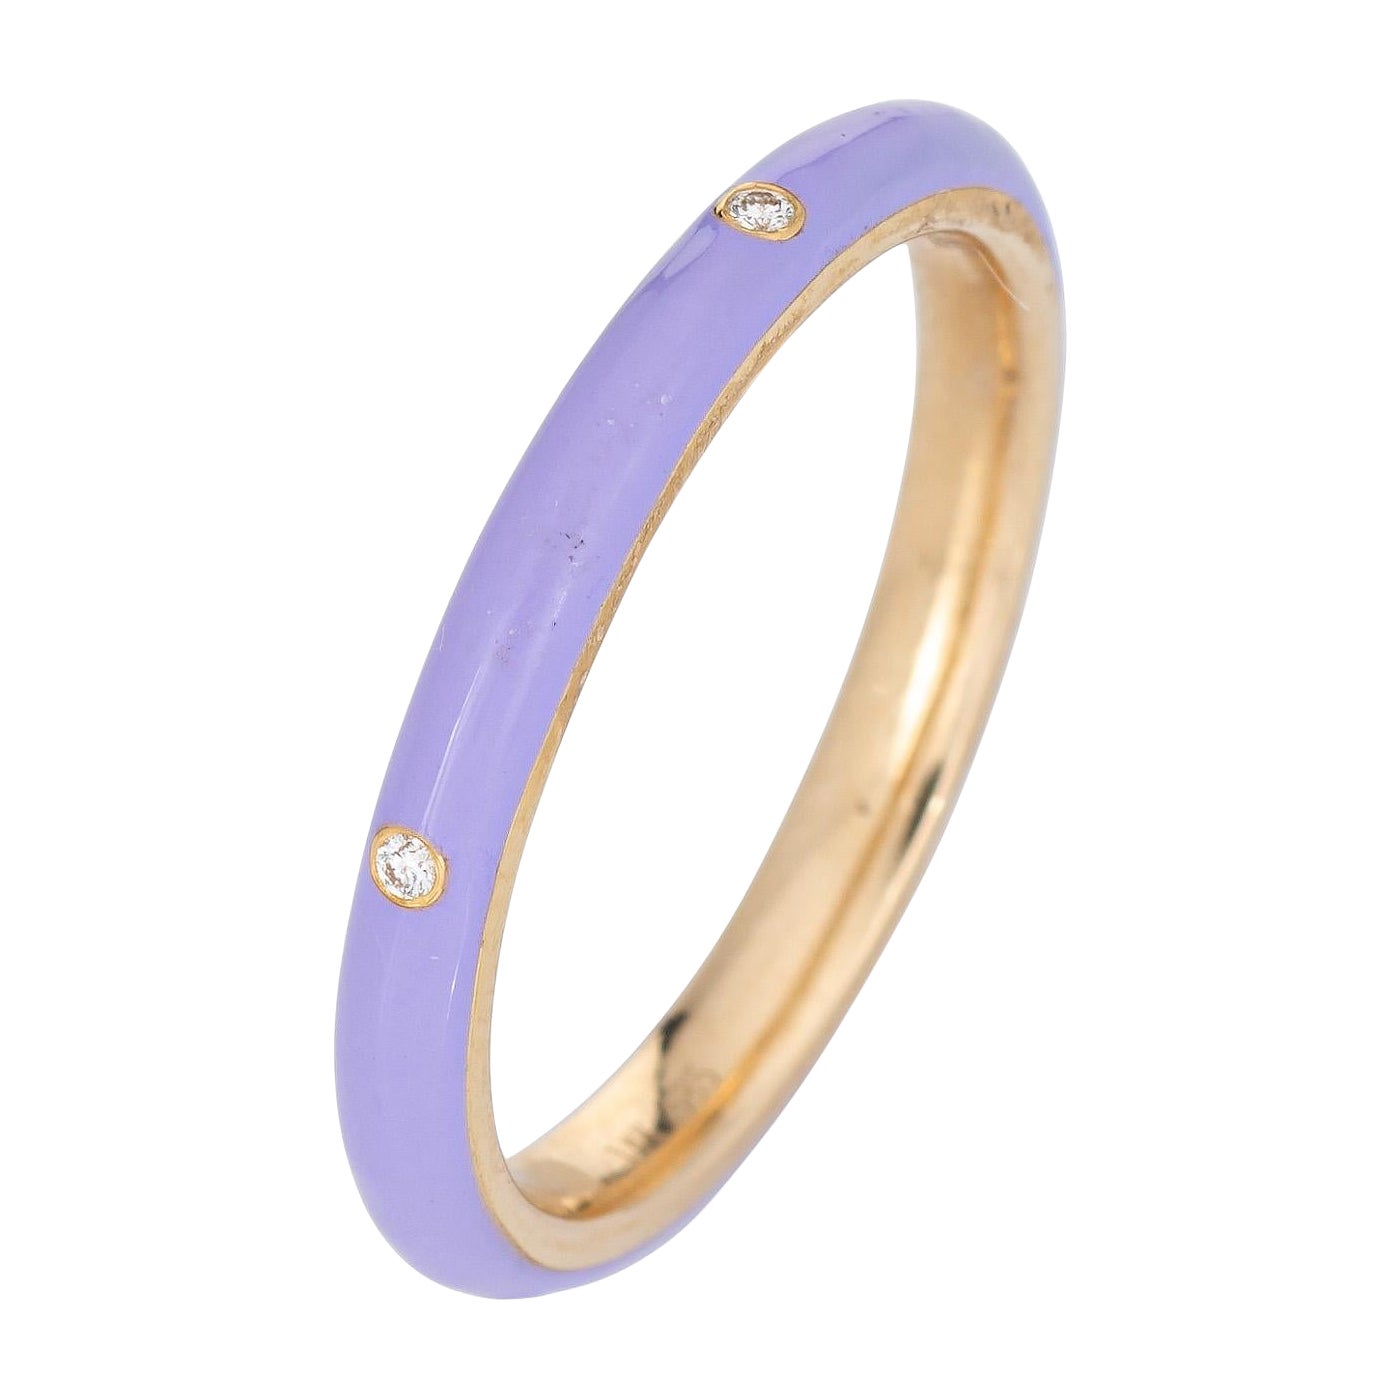 Lilac Enamel Diamond Ring 14k Yellow Gold Stacking Band Fine Jewelry For Sale